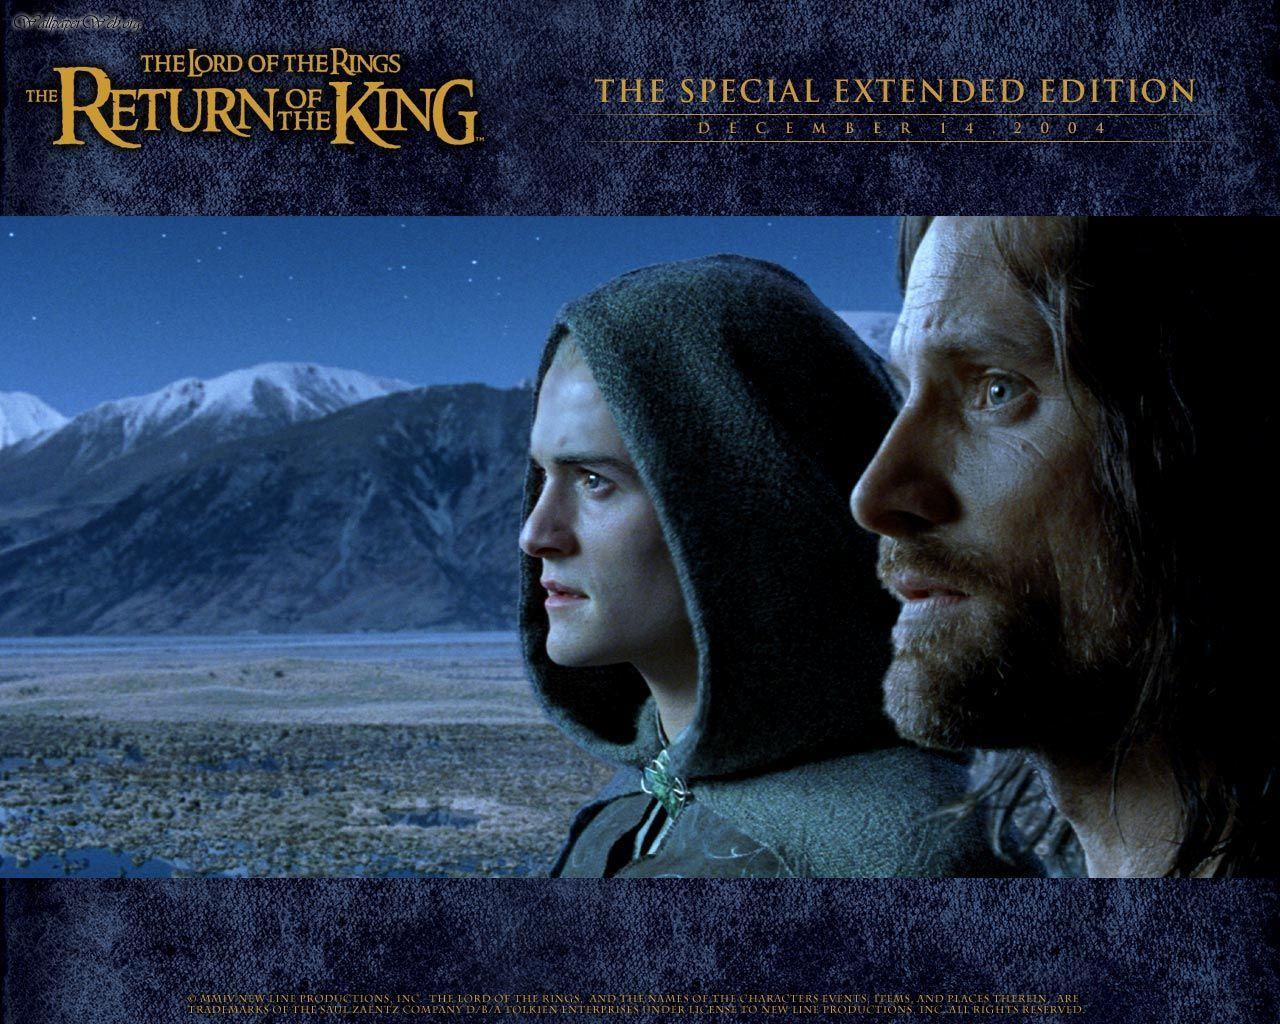 Movies: The Lord of the Rings: The Return of the King, picture nr. 25060